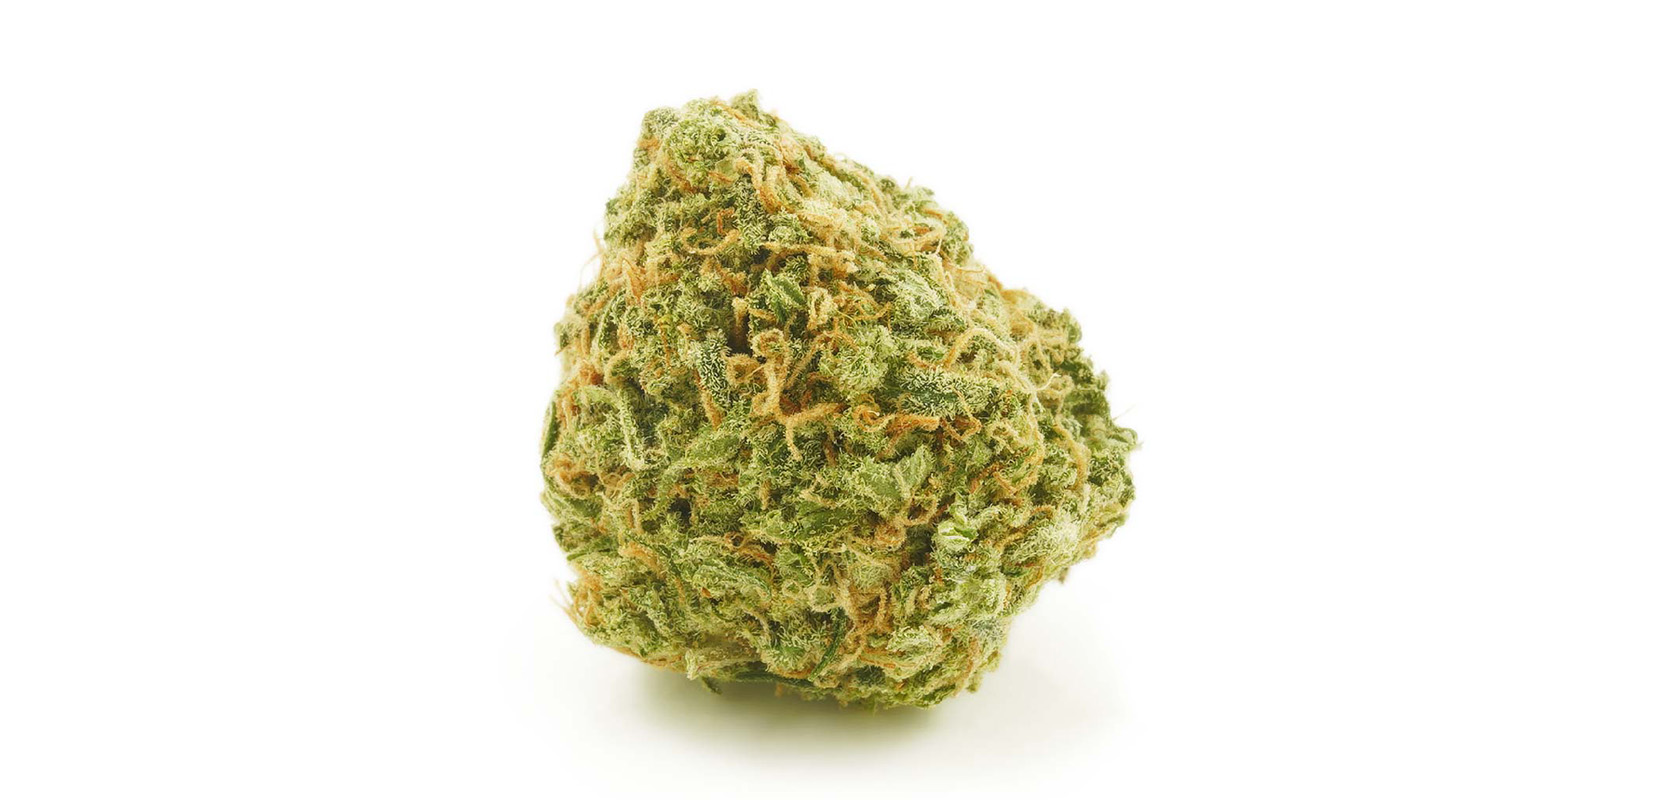 Potent White Widow value buds high THC weed strain. Online dispensary Canada with free shipping. Mail order marijuana dispensary.